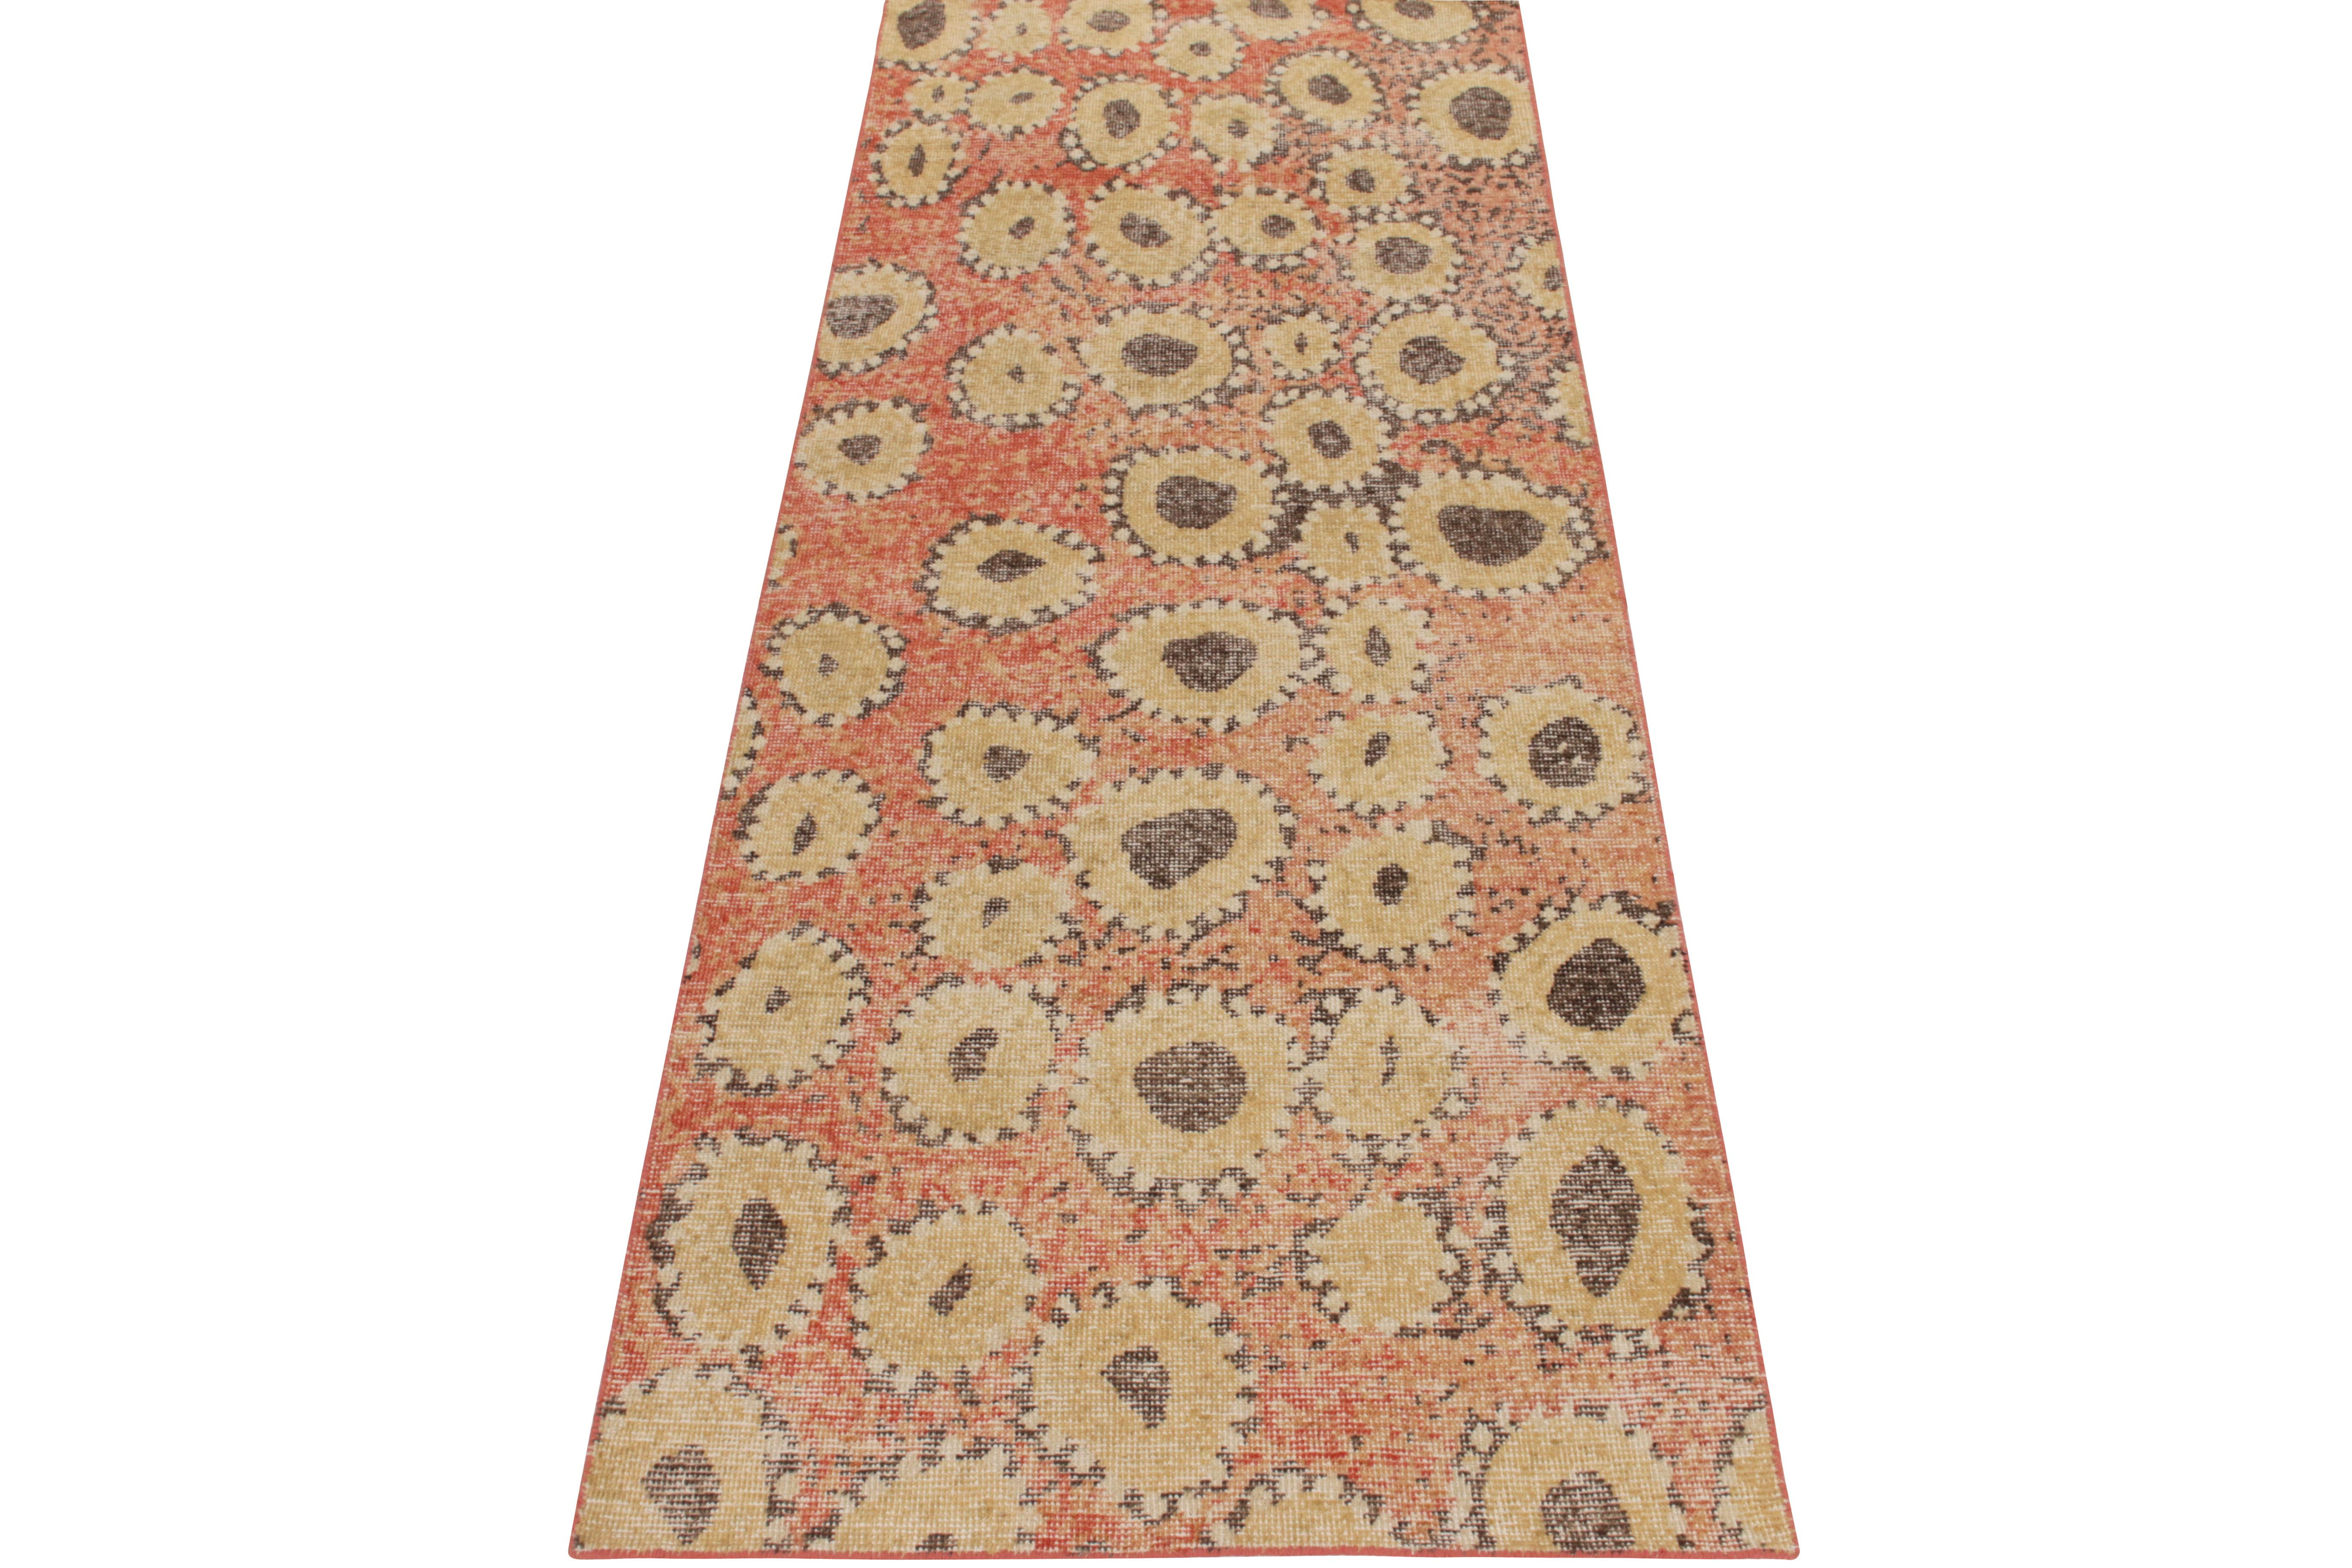 A 3x8 distressed style runner from Rug & Kilim’s Homage collection emphasising on funky, retro geometry with circles in gold, muted brown & white—all lying comfortably on the tangerine background further complementing the shabby chic appeal of this